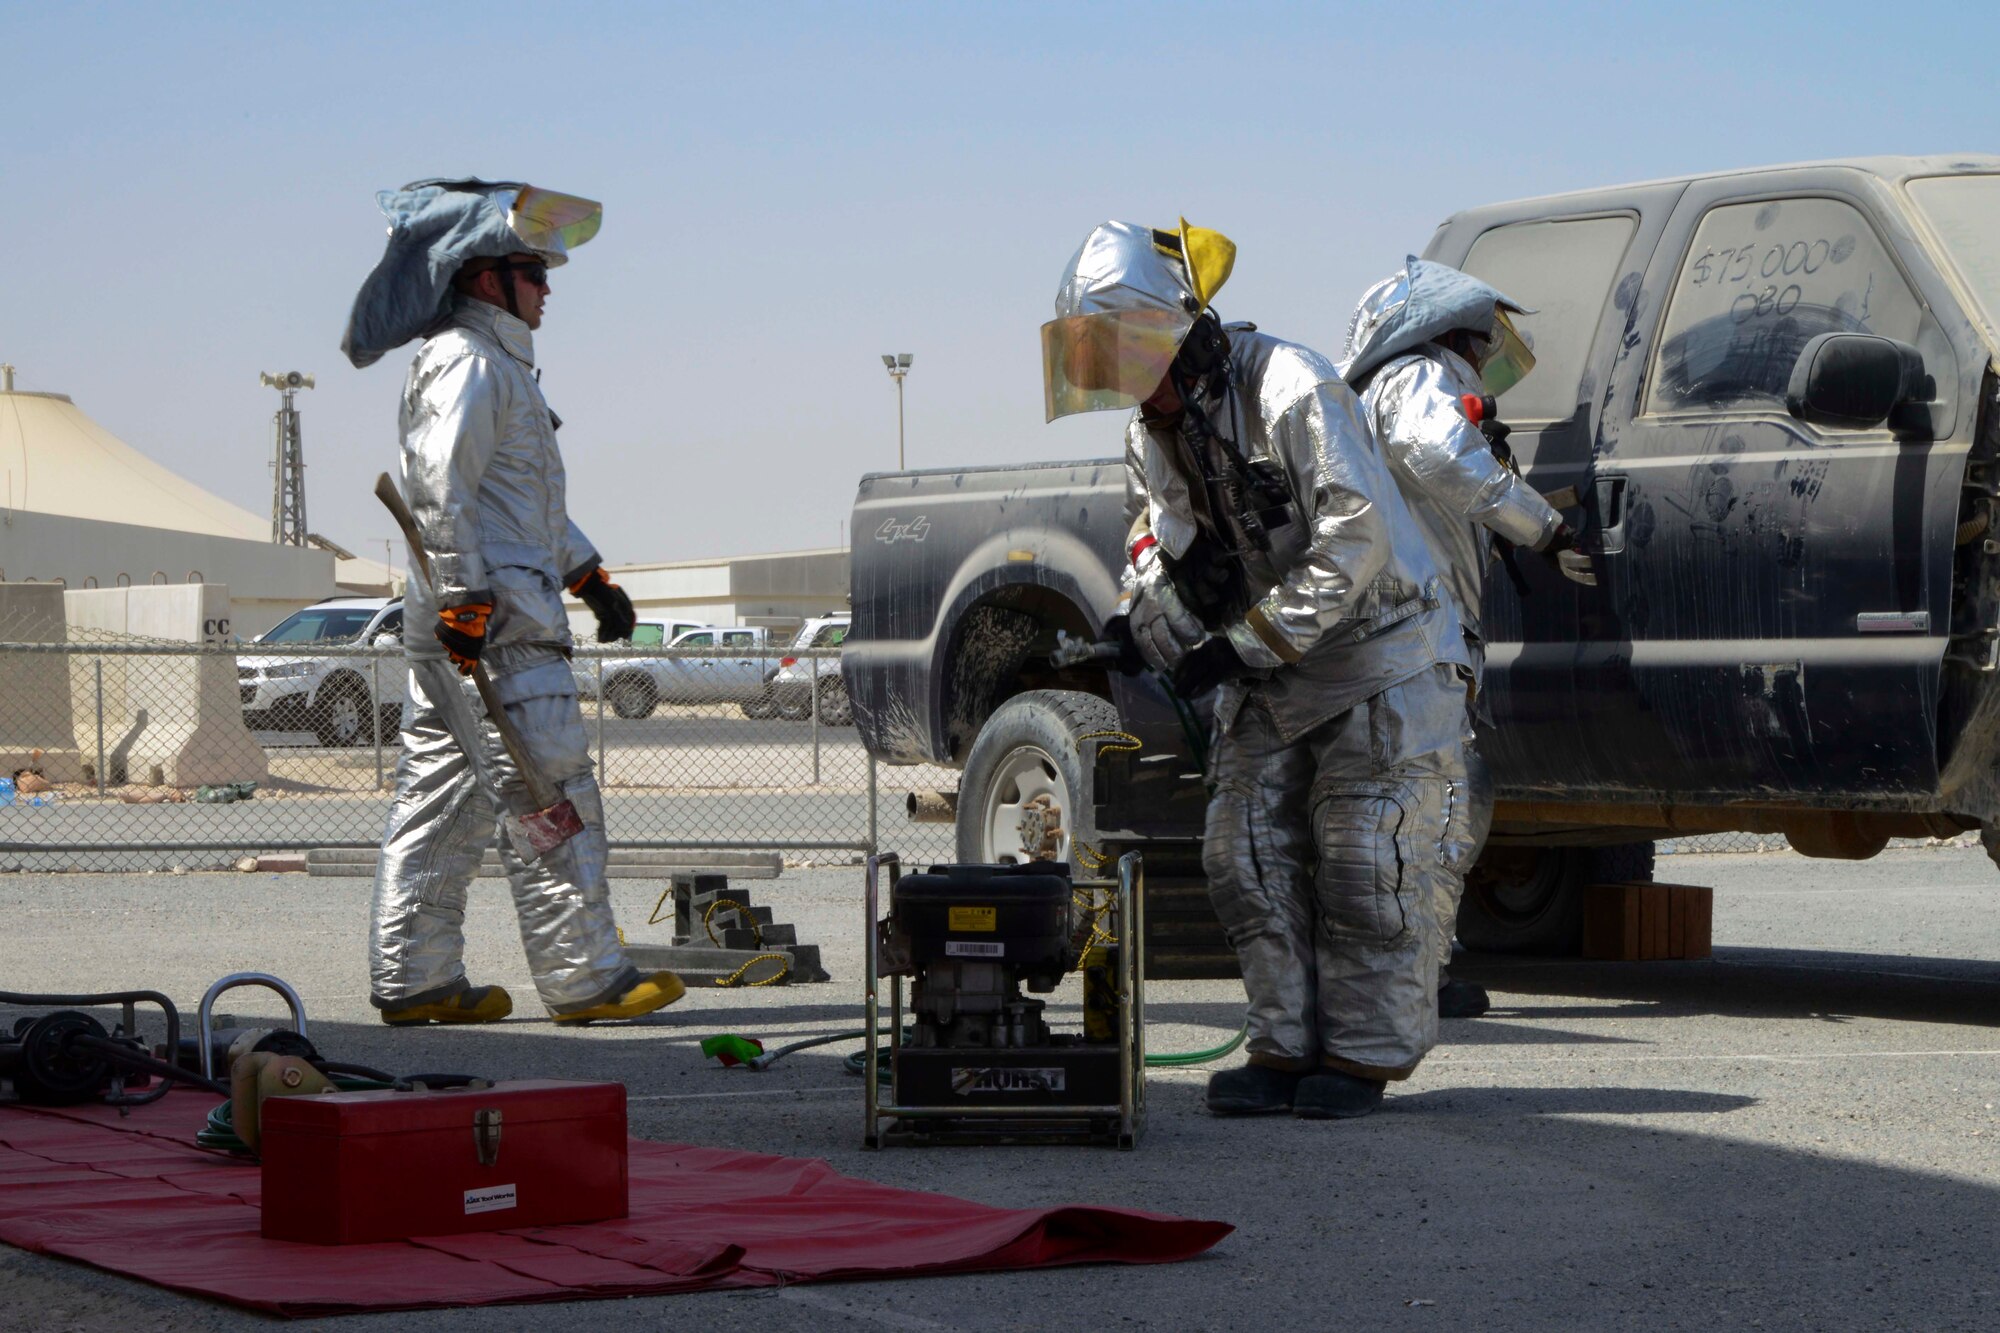 U.S. Air Force Airmen assigned to the 379th Expeditionary Civil Engineer Squadron prepare for a vehicle extrication demonstration at Al Udeid Air Base, Qatar, Oct. 8, 2014. Vehicle extrication is the process of removing a vehicle from around a person who has been involved in a motor vehicle accident. (U.S. Air Force photo by Staff Sgt. Ciara Wymbs) 